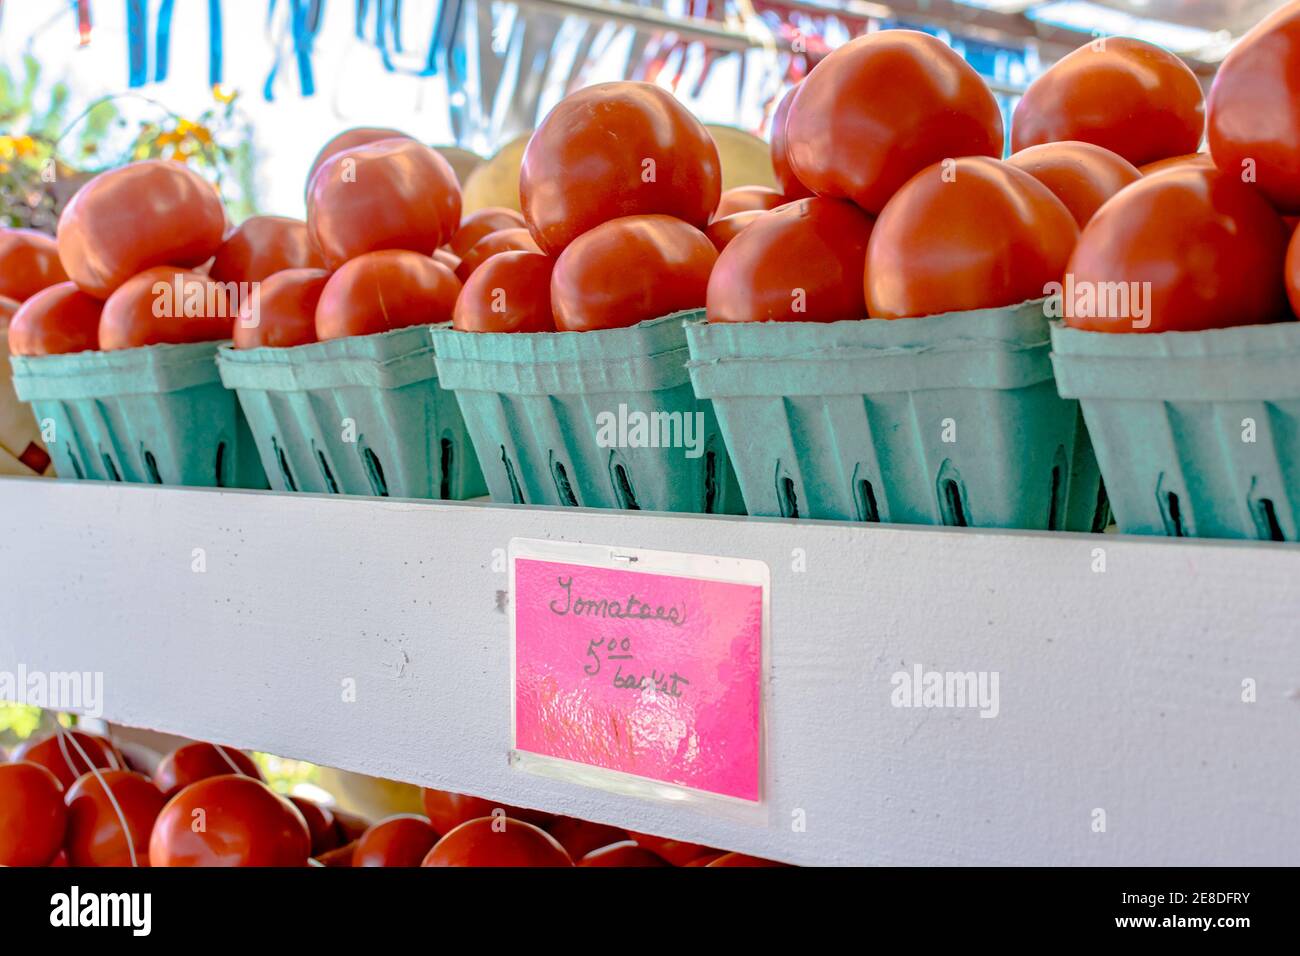 Display of tomatoes for sale at a farmers' market Stock Photo